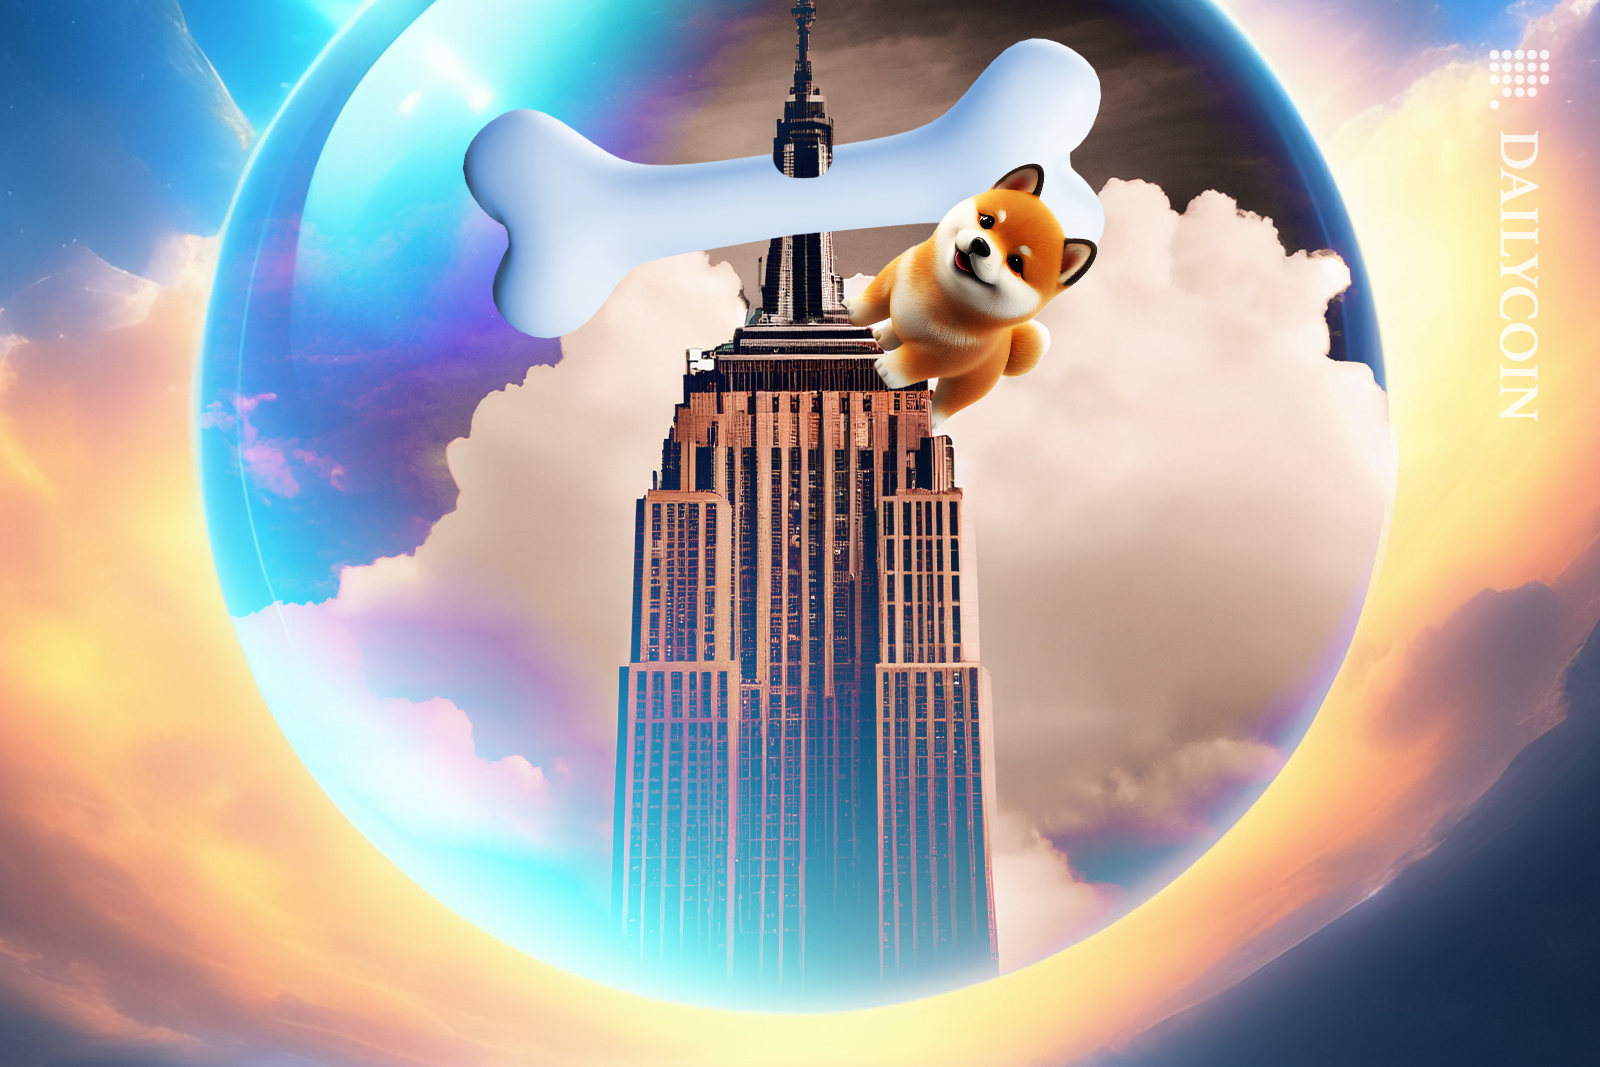 Shiba Inu on an Empire state building with shiba BONE at the top.